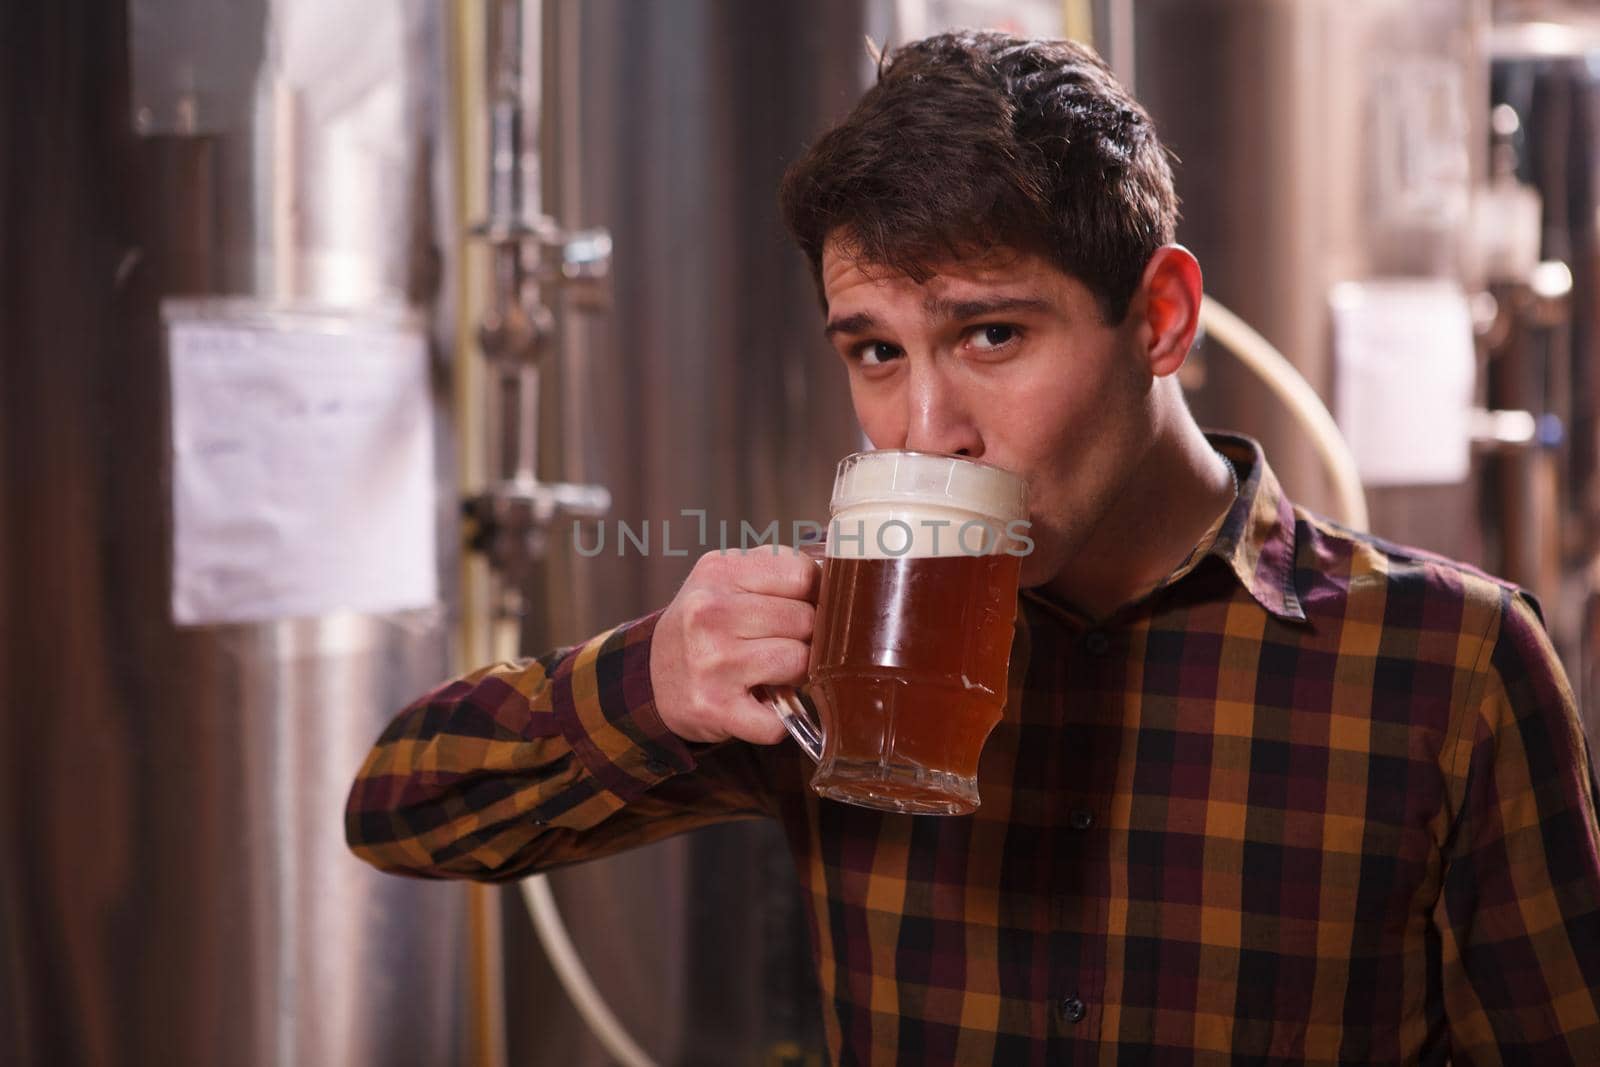 Man sipping delicious craft beer from a mug, looking to the camera